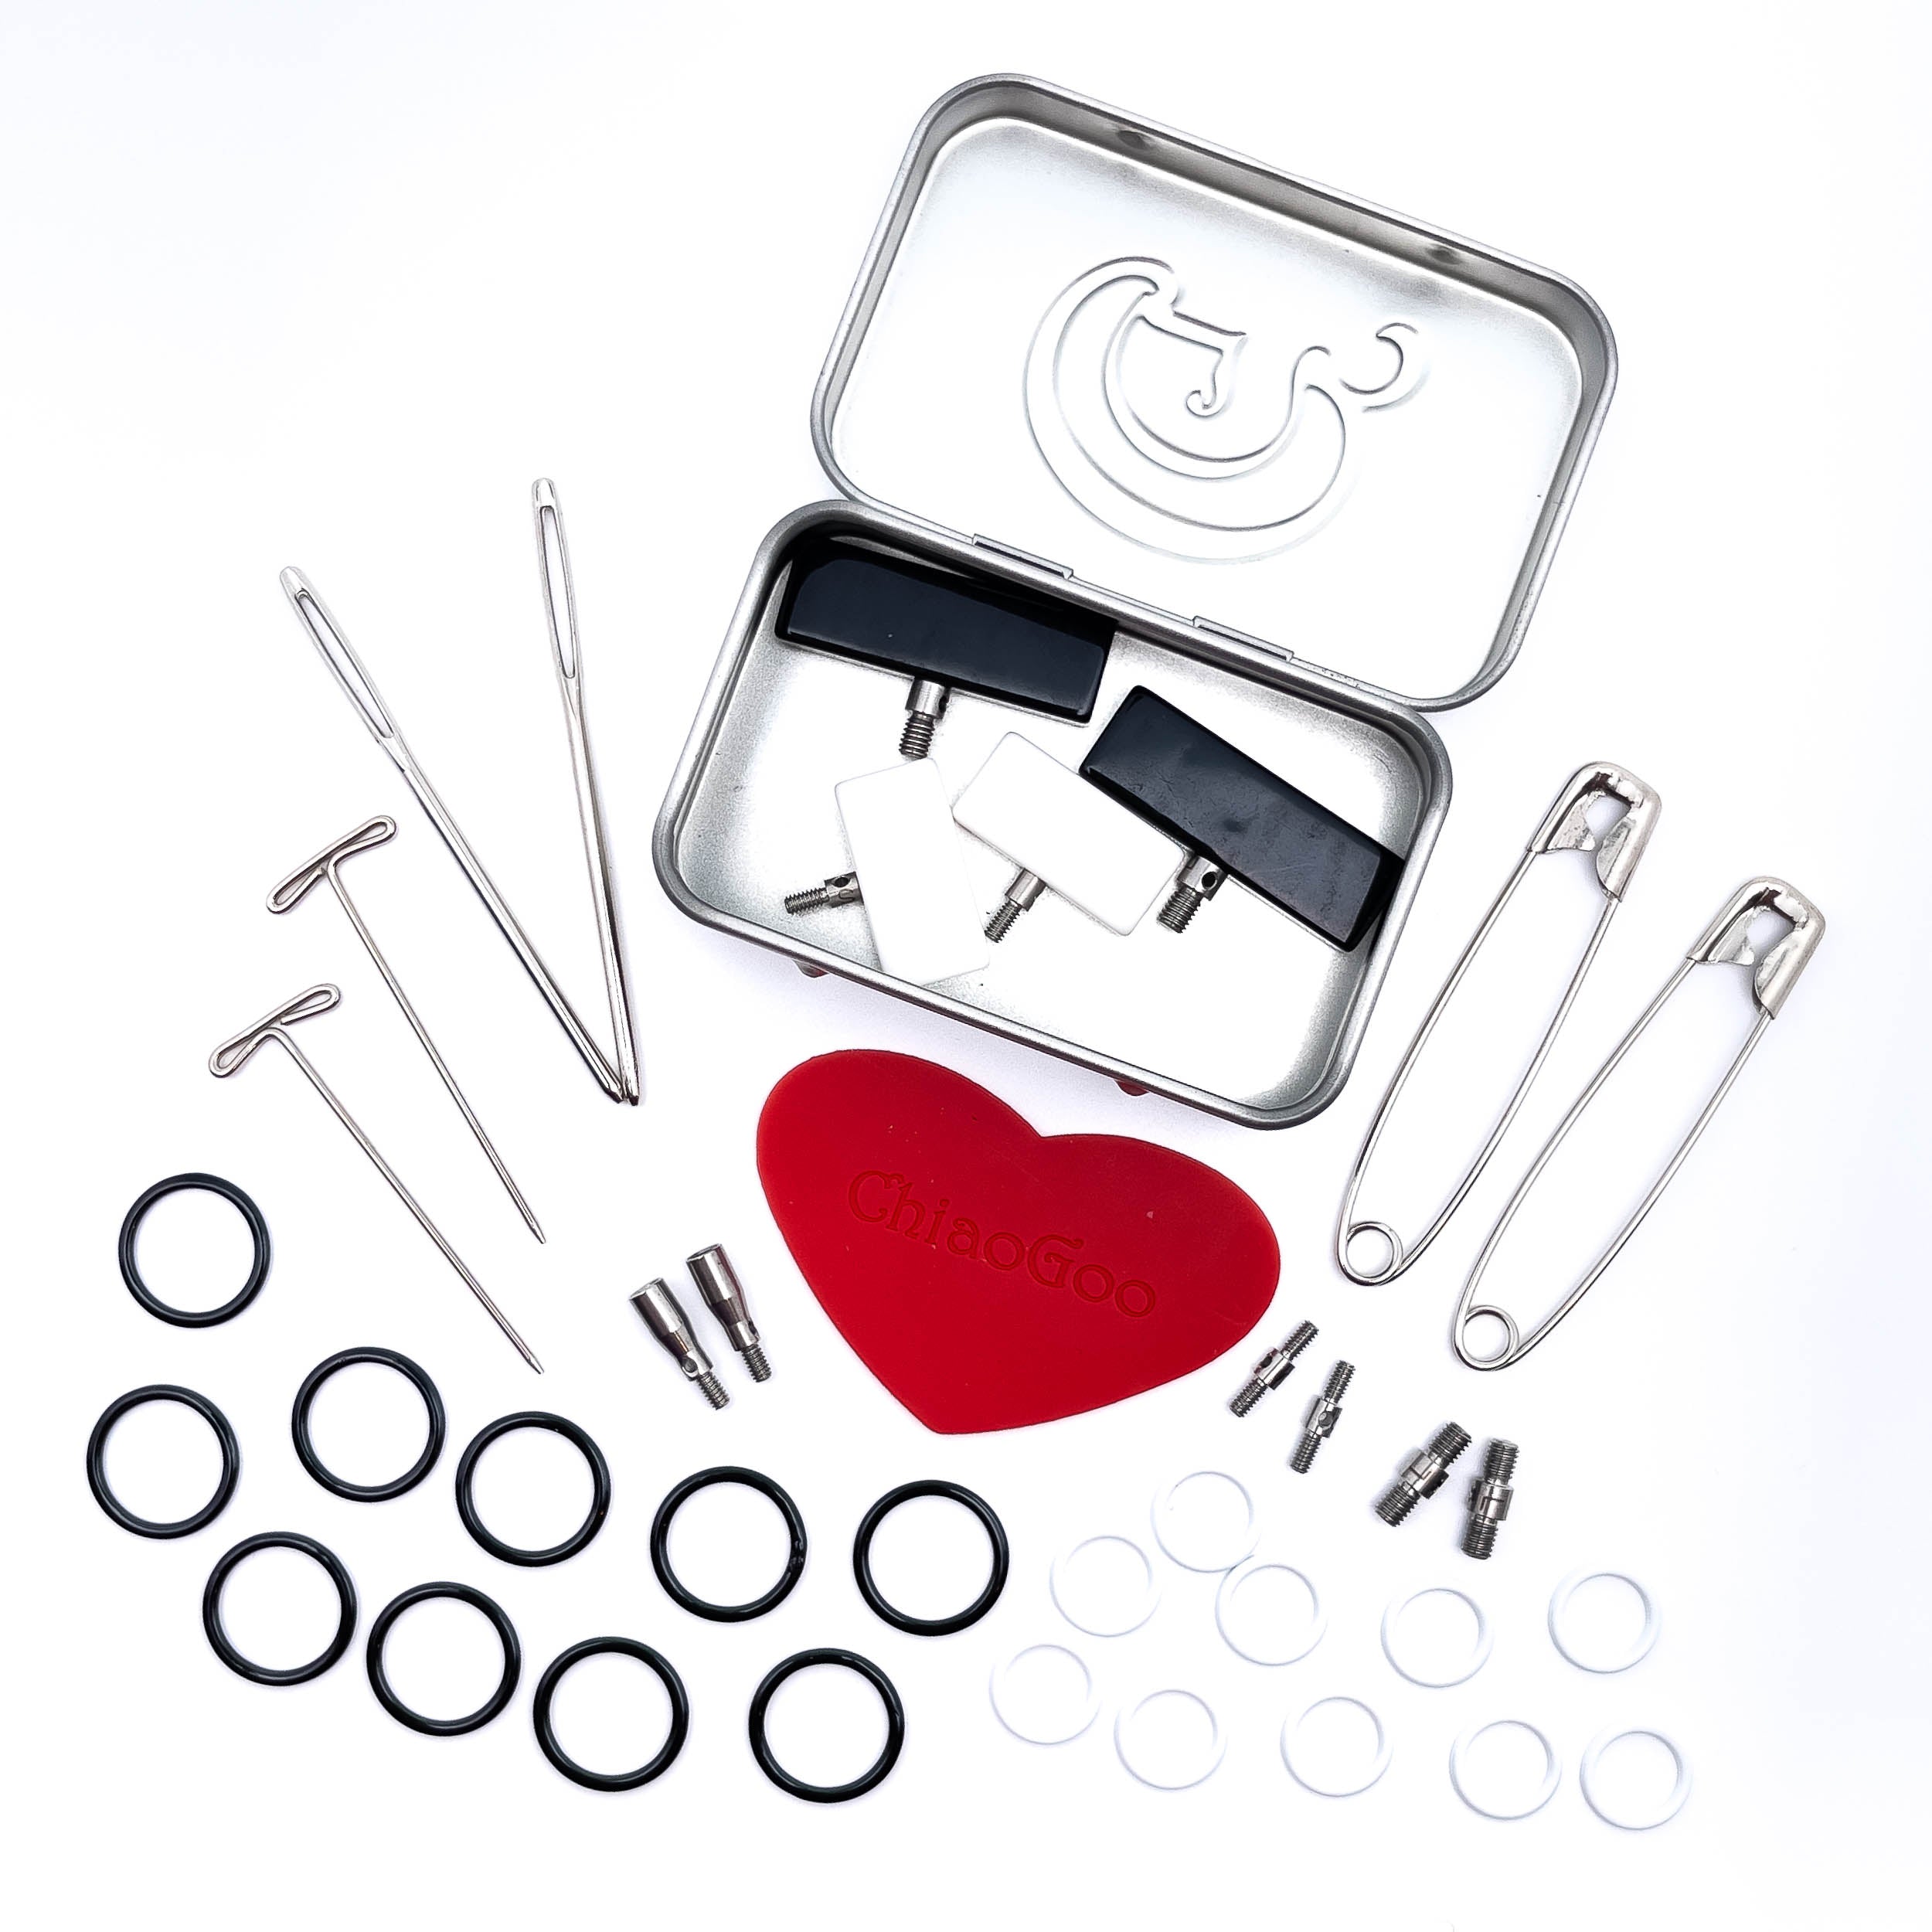 ChiaoGoo Tools Kit in a 2.4-Inch x 1.6-Inch (6 x4 cm) Tin with Small [S] and Large [L] Accessories